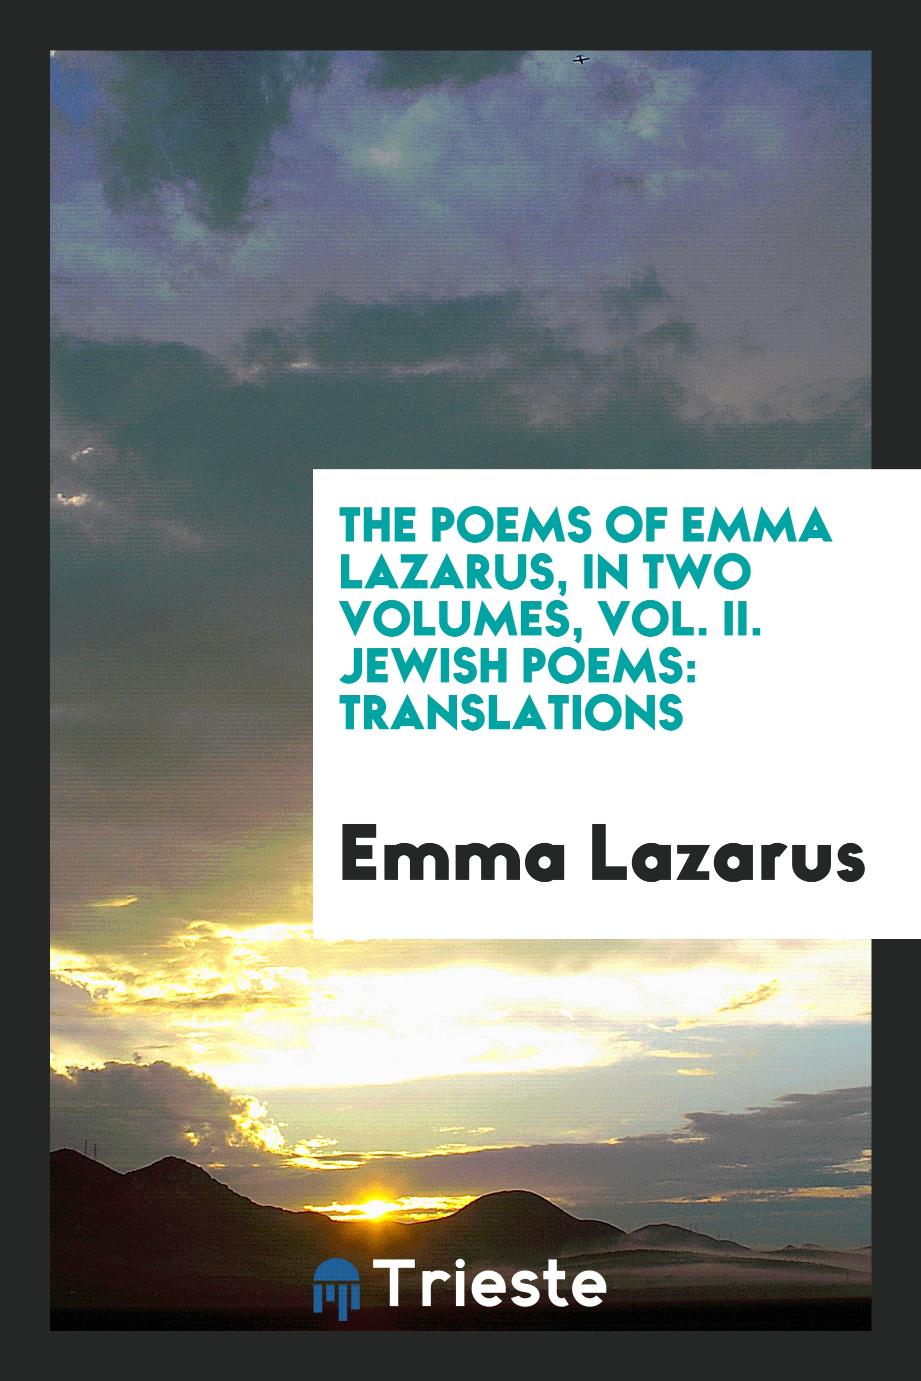 The Poems of Emma Lazarus, in Two Volumes, Vol. II. Jewish Poems: Translations